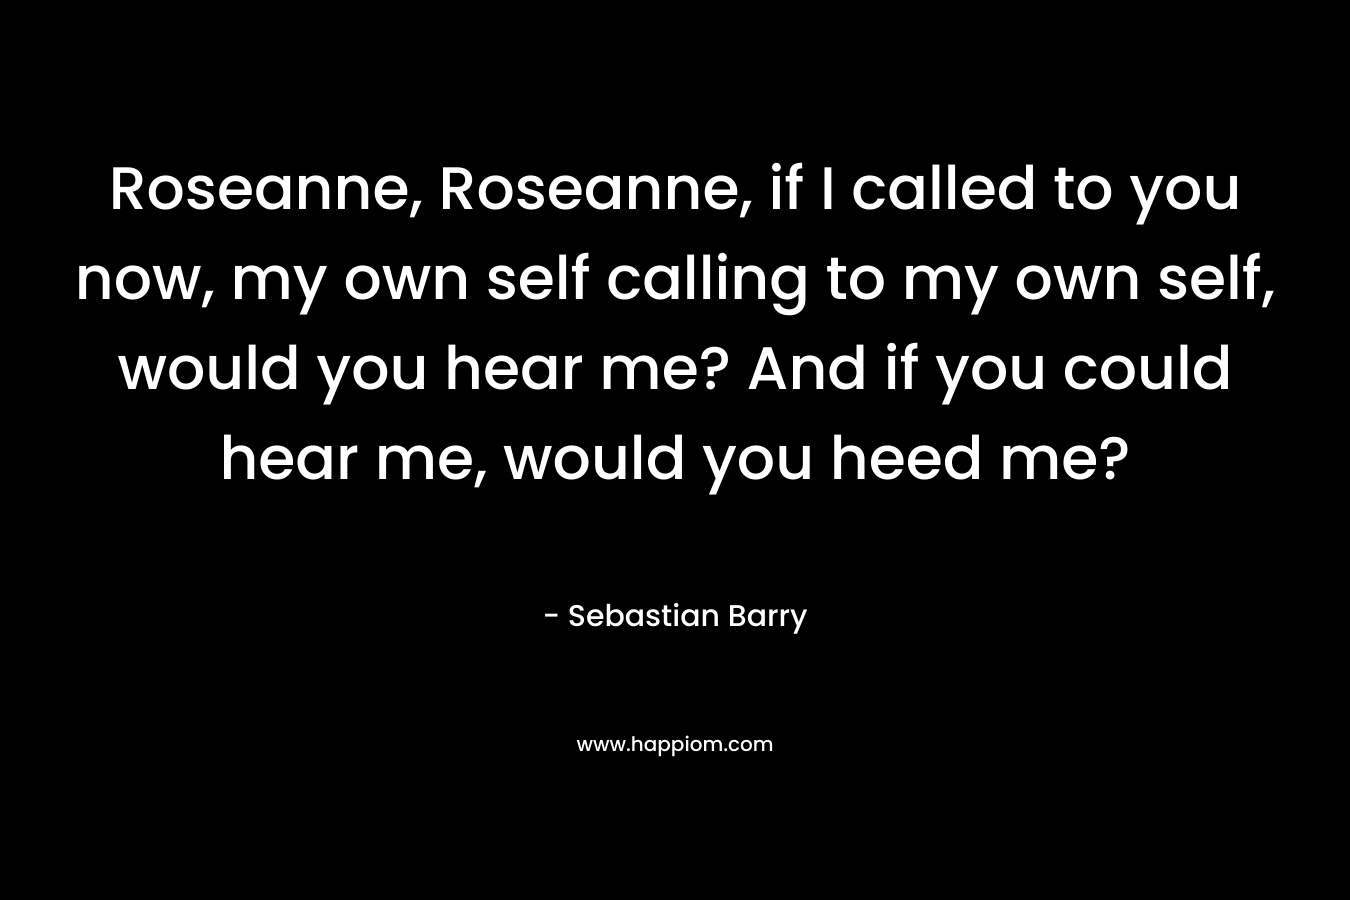 Roseanne, Roseanne, if I called to you now, my own self calling to my own self, would you hear me? And if you could hear me, would you heed me? – Sebastian Barry